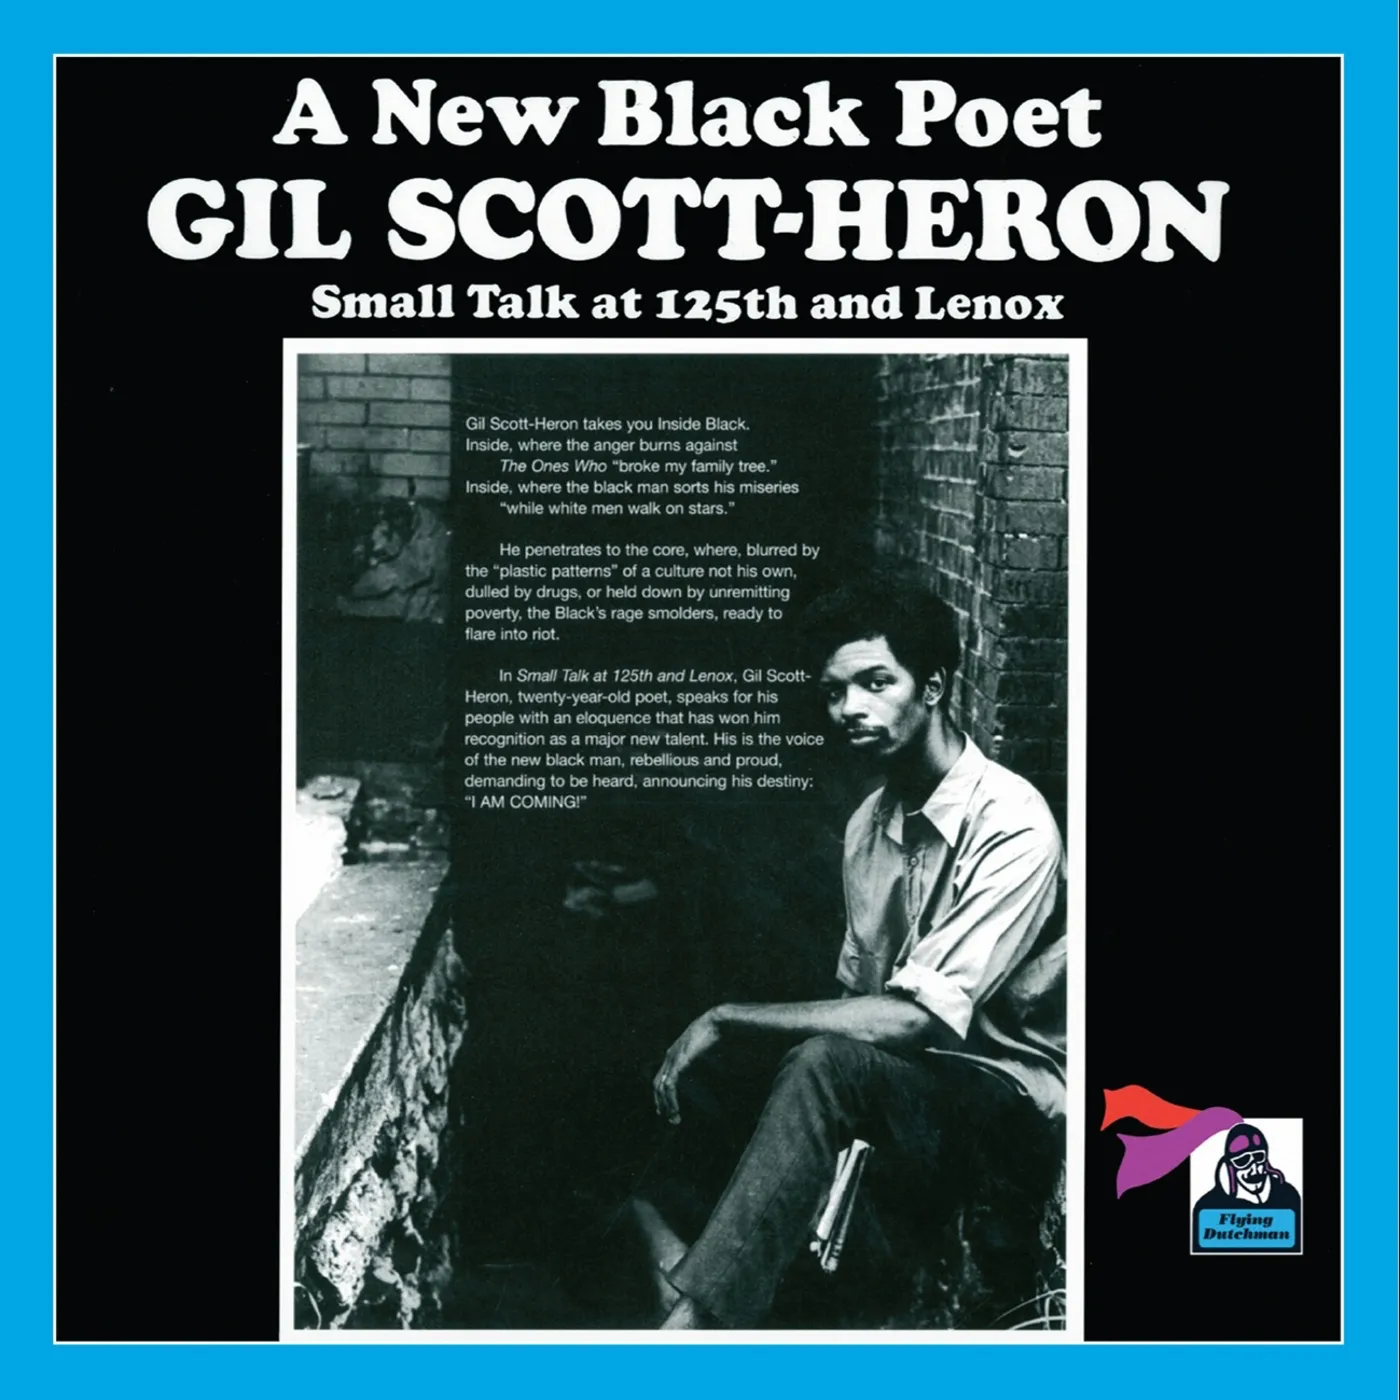 <strong>Gil Scott-Heron - Small Talk at 125th and Lenox</strong> (Vinyl LP - white)